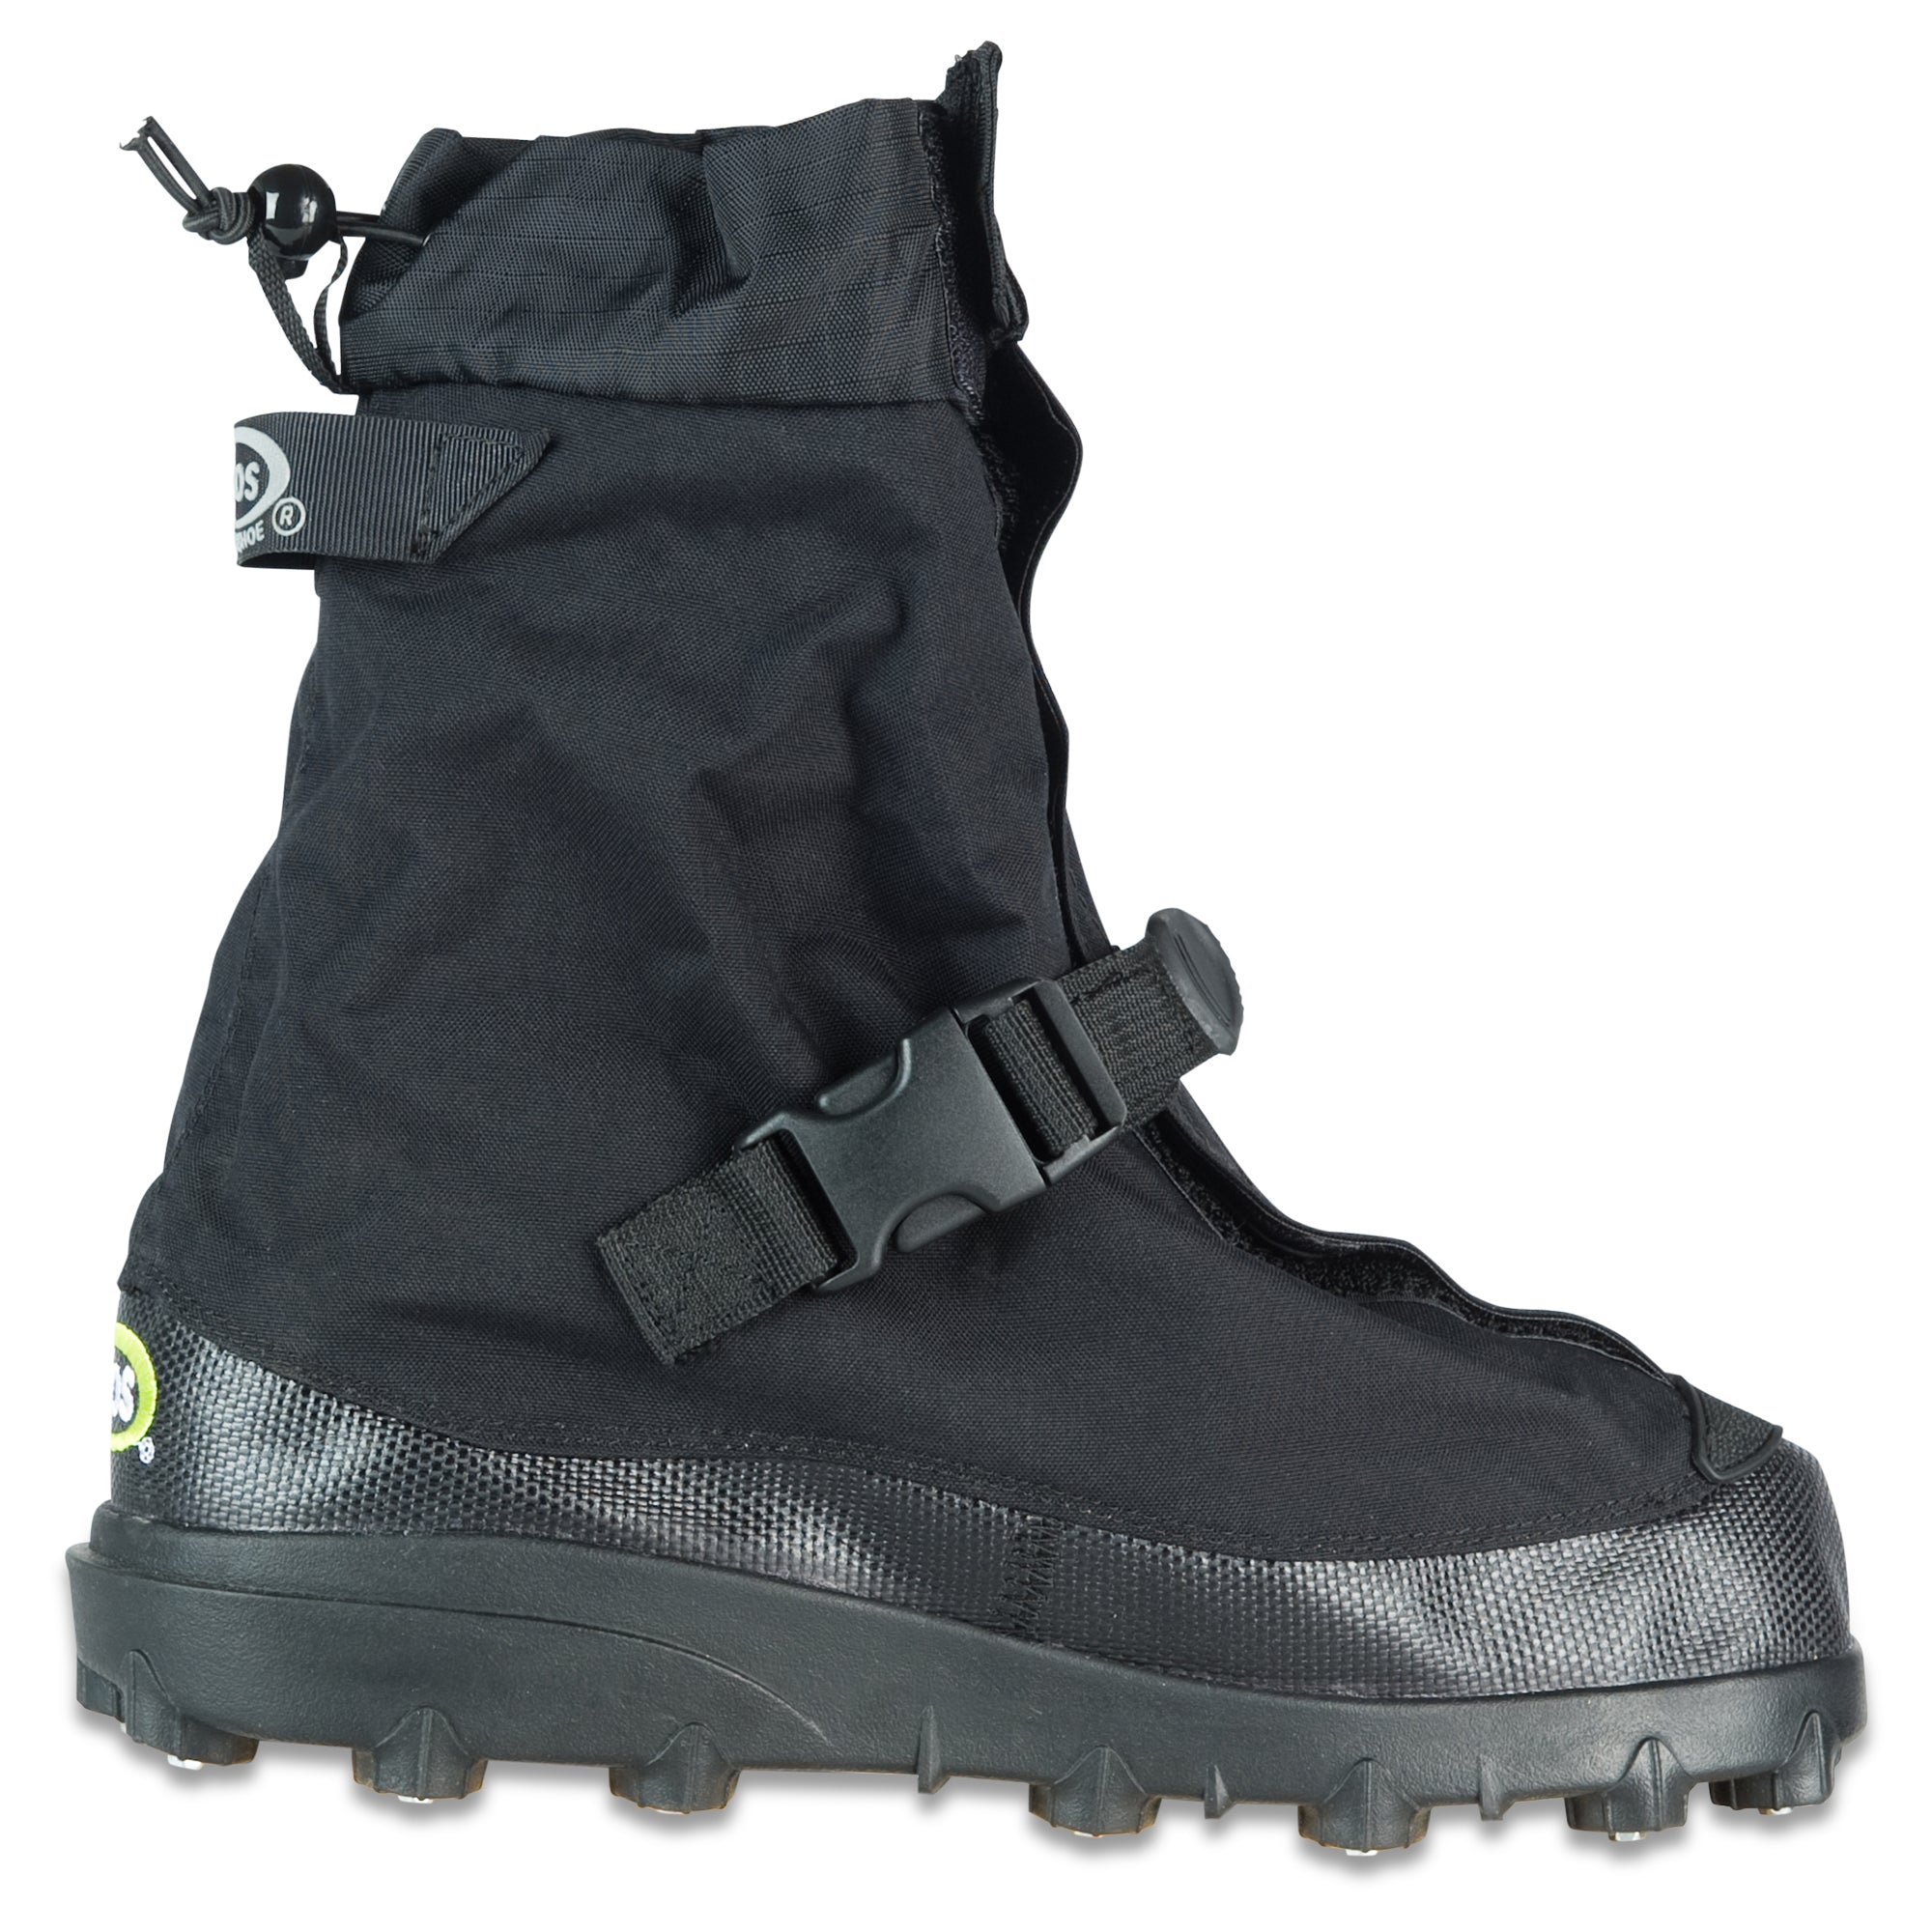 NEOS Voyager™ STABILicers Overshoe 